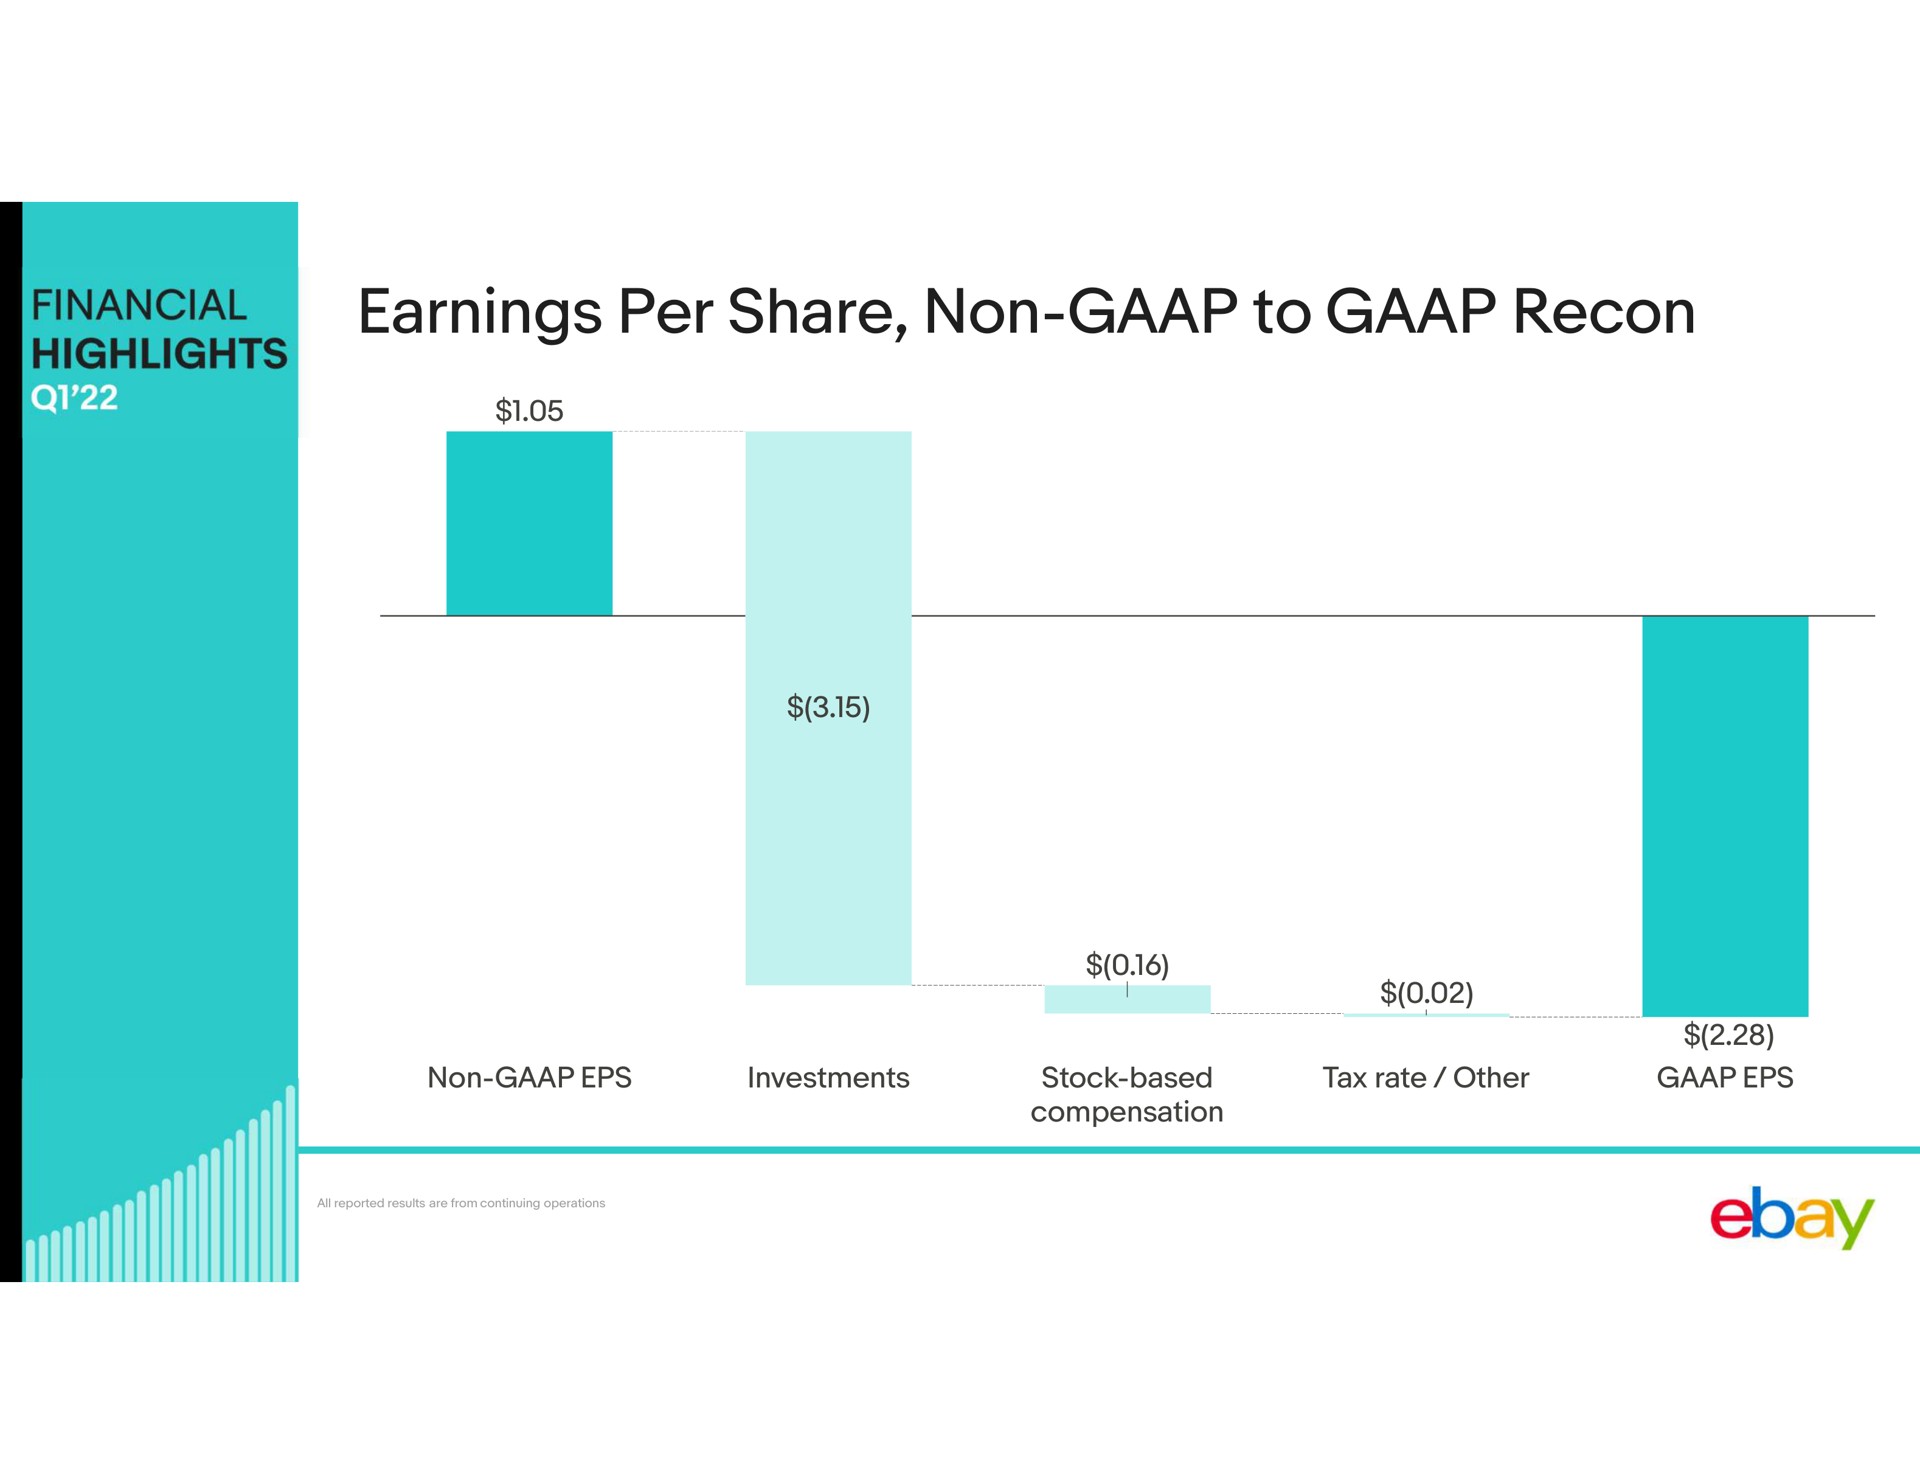 earnings per share non to recon | eBay